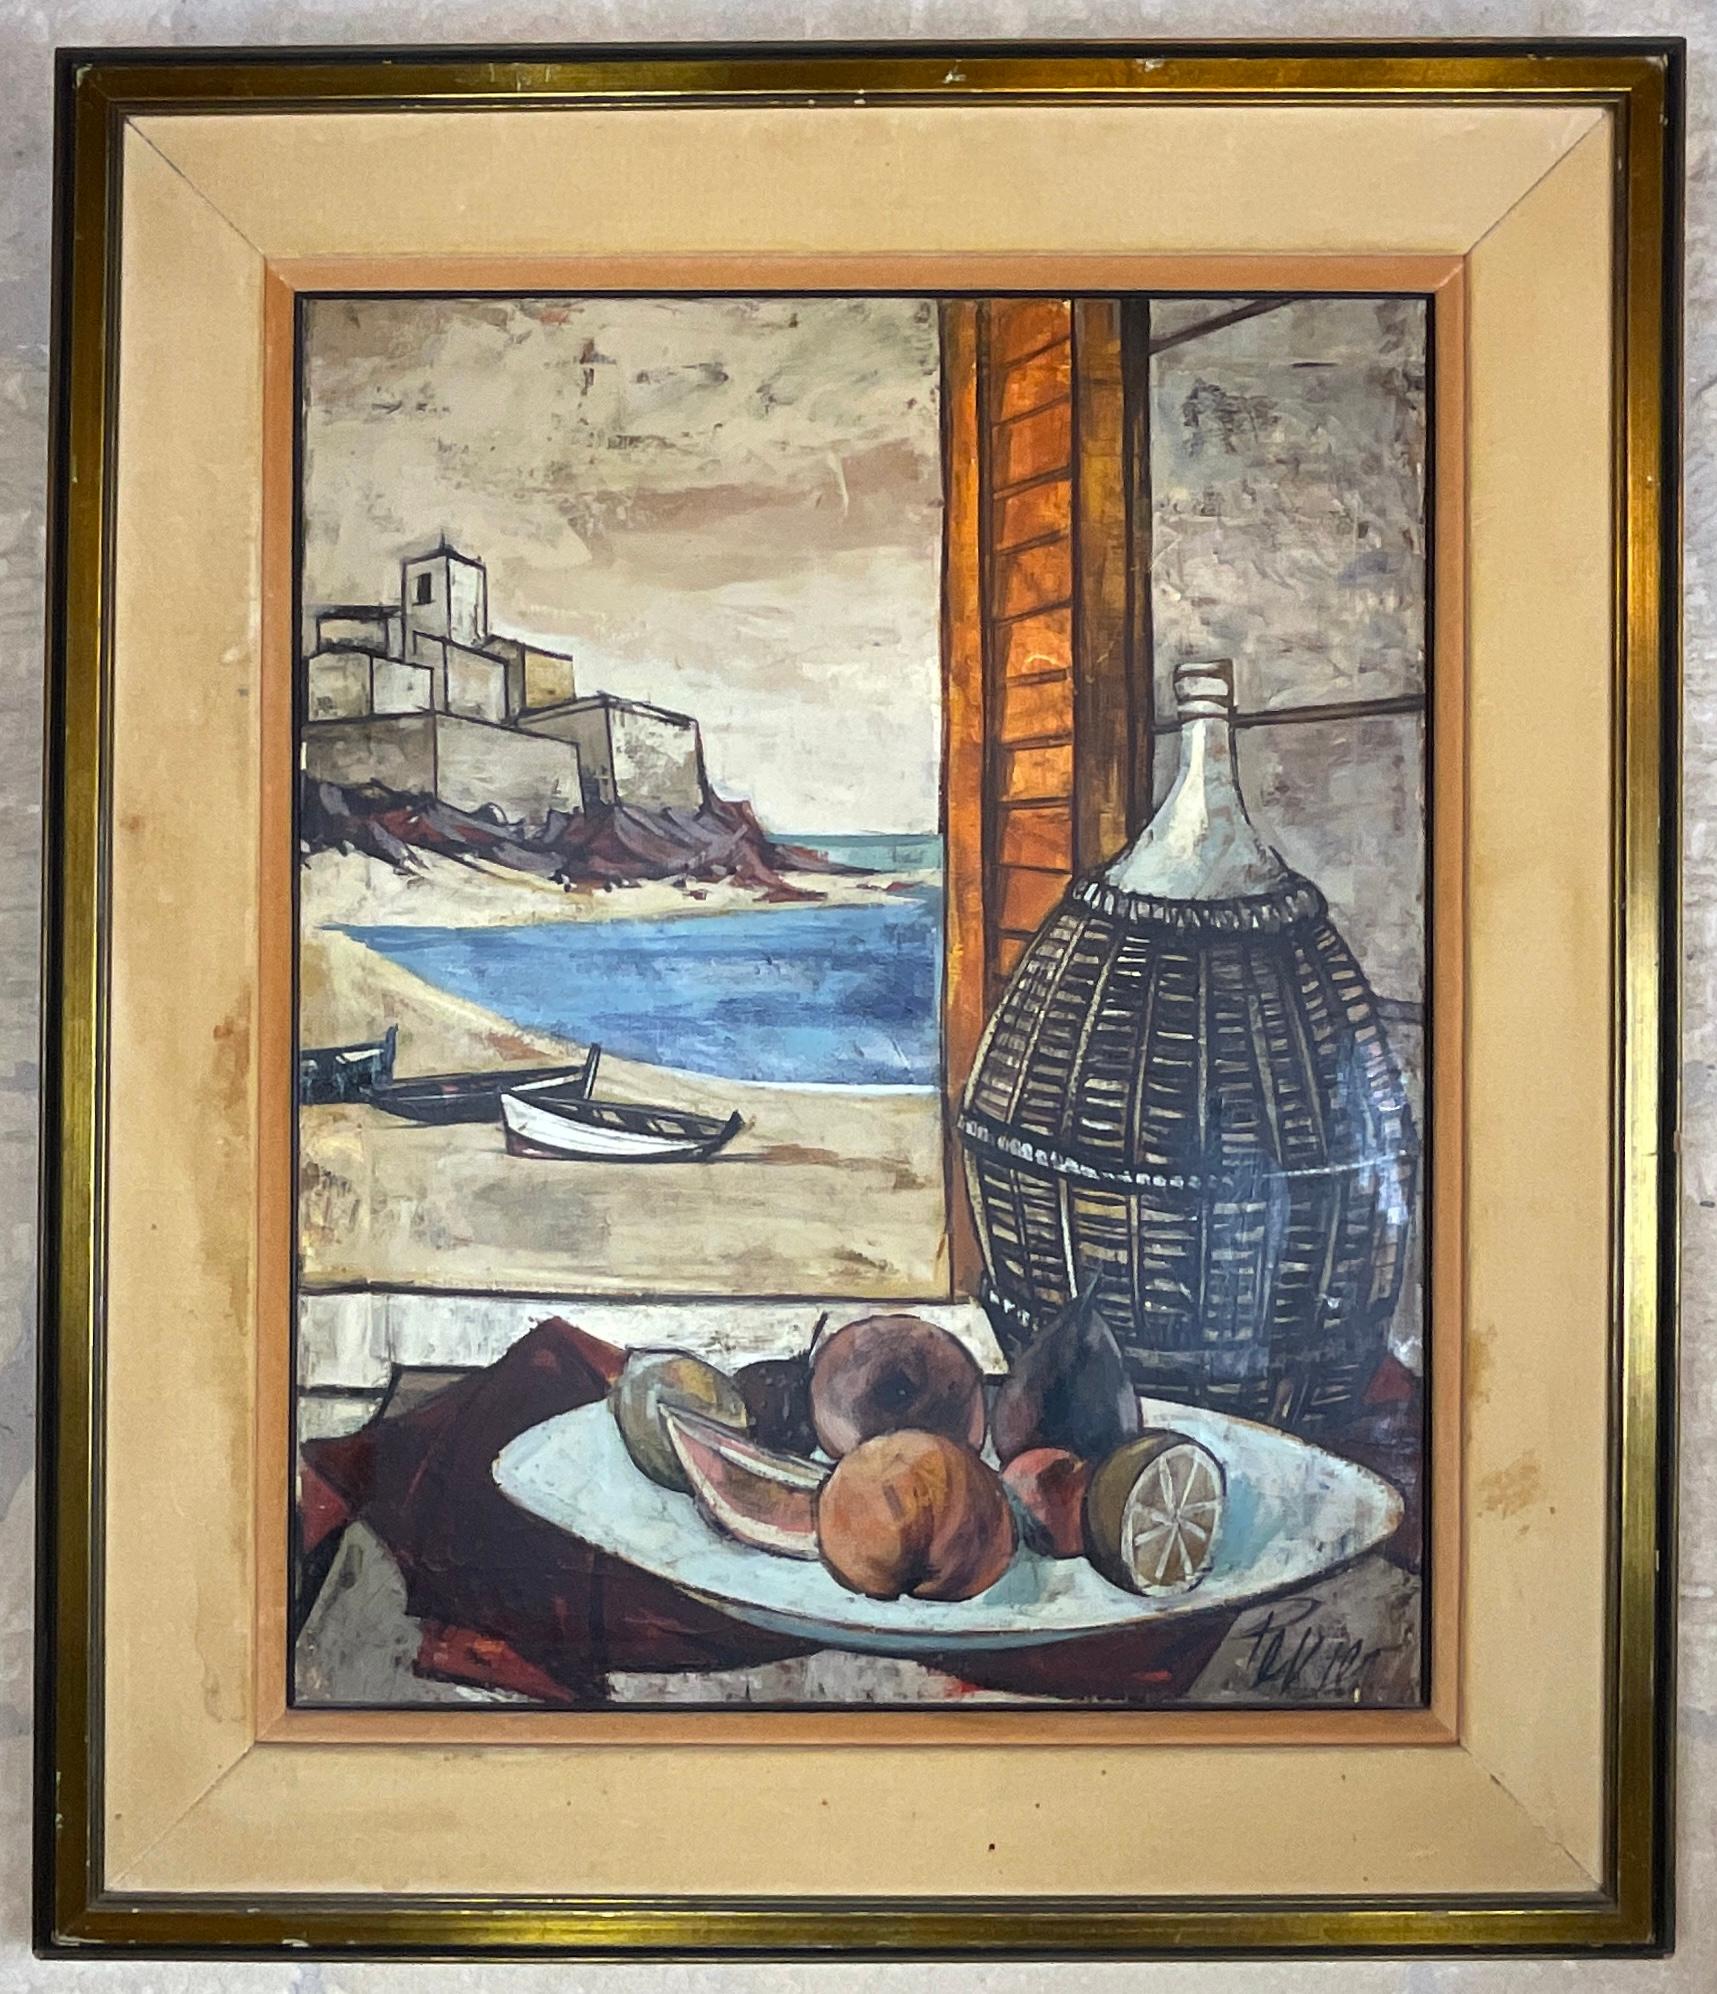 Large nautical seascape oil on canvas painting by Charles Levier. Window to Corsican port featuring a bowl of fruit leading one's imagination that the artist was sitting at a table looking out the window while producing this magnificent work of